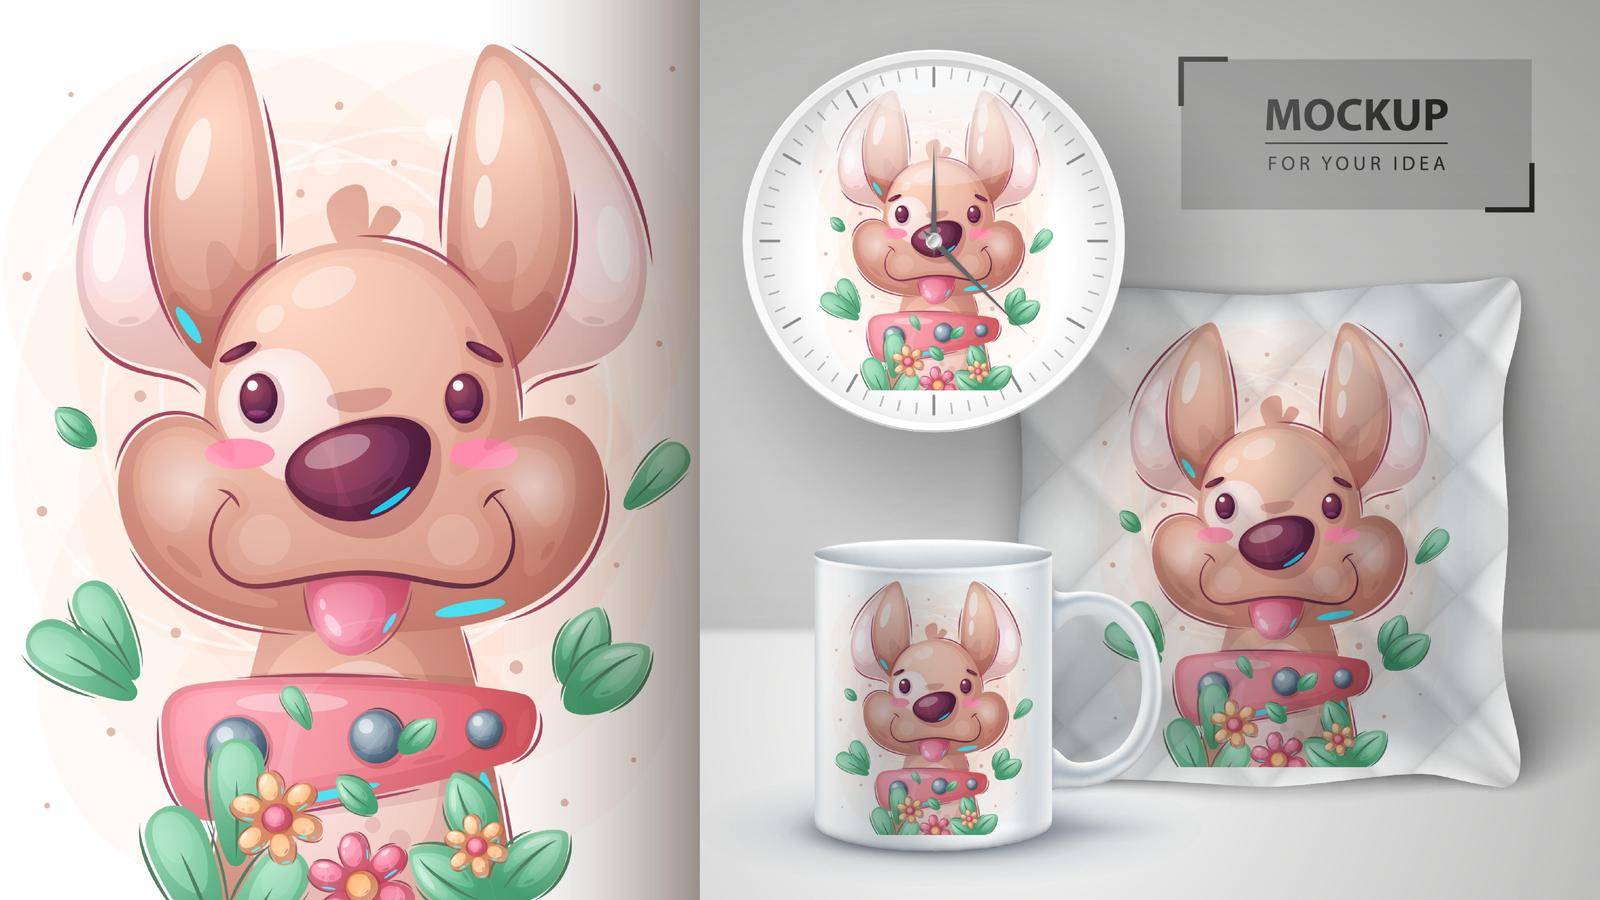 Cute dog in flower - poster and merchandising by rwgusev